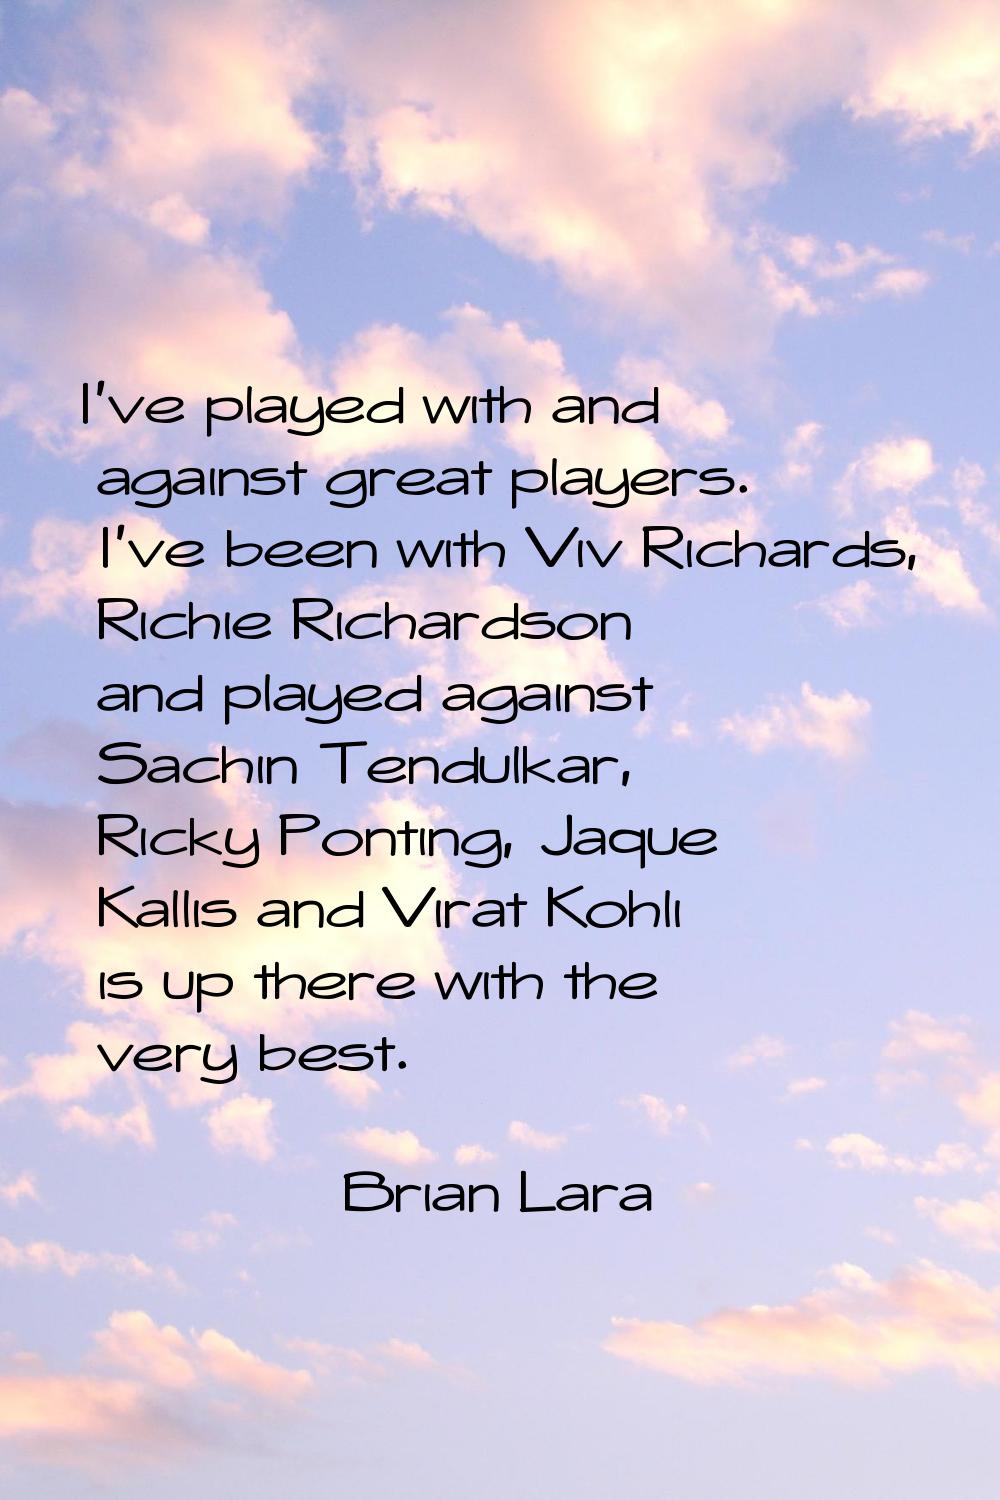 I've played with and against great players. I've been with Viv Richards, Richie Richardson and play